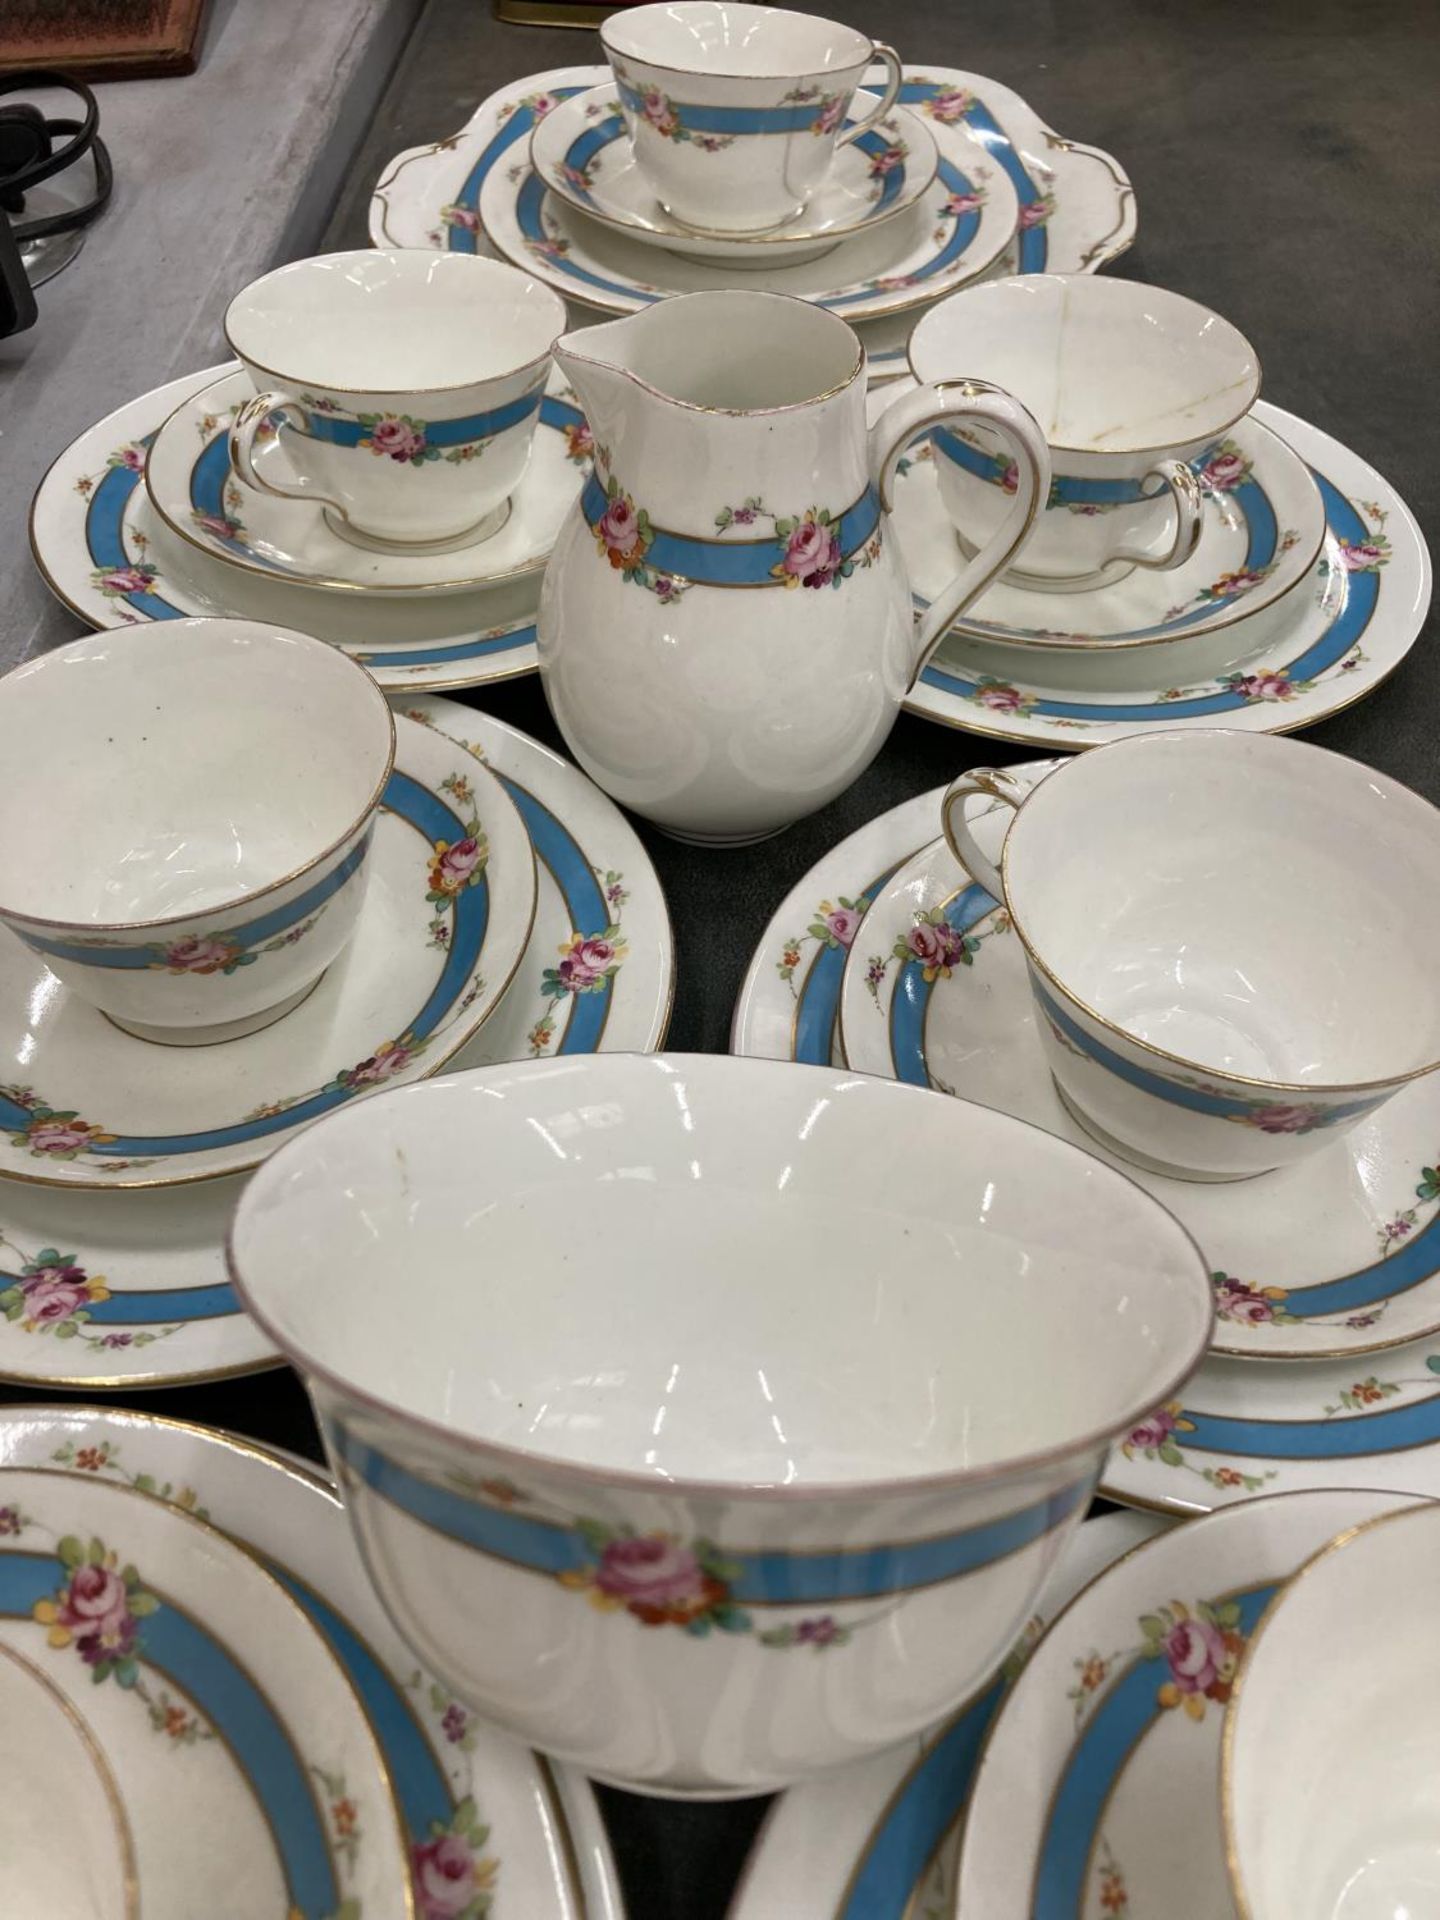 A CROWN STAFFORDSHIRE TEASET TO INCLUDE A CAKE PLATE, CREAM JUG, SUGAR BOWL, CUPS, SAUCERS AND - Image 4 of 5